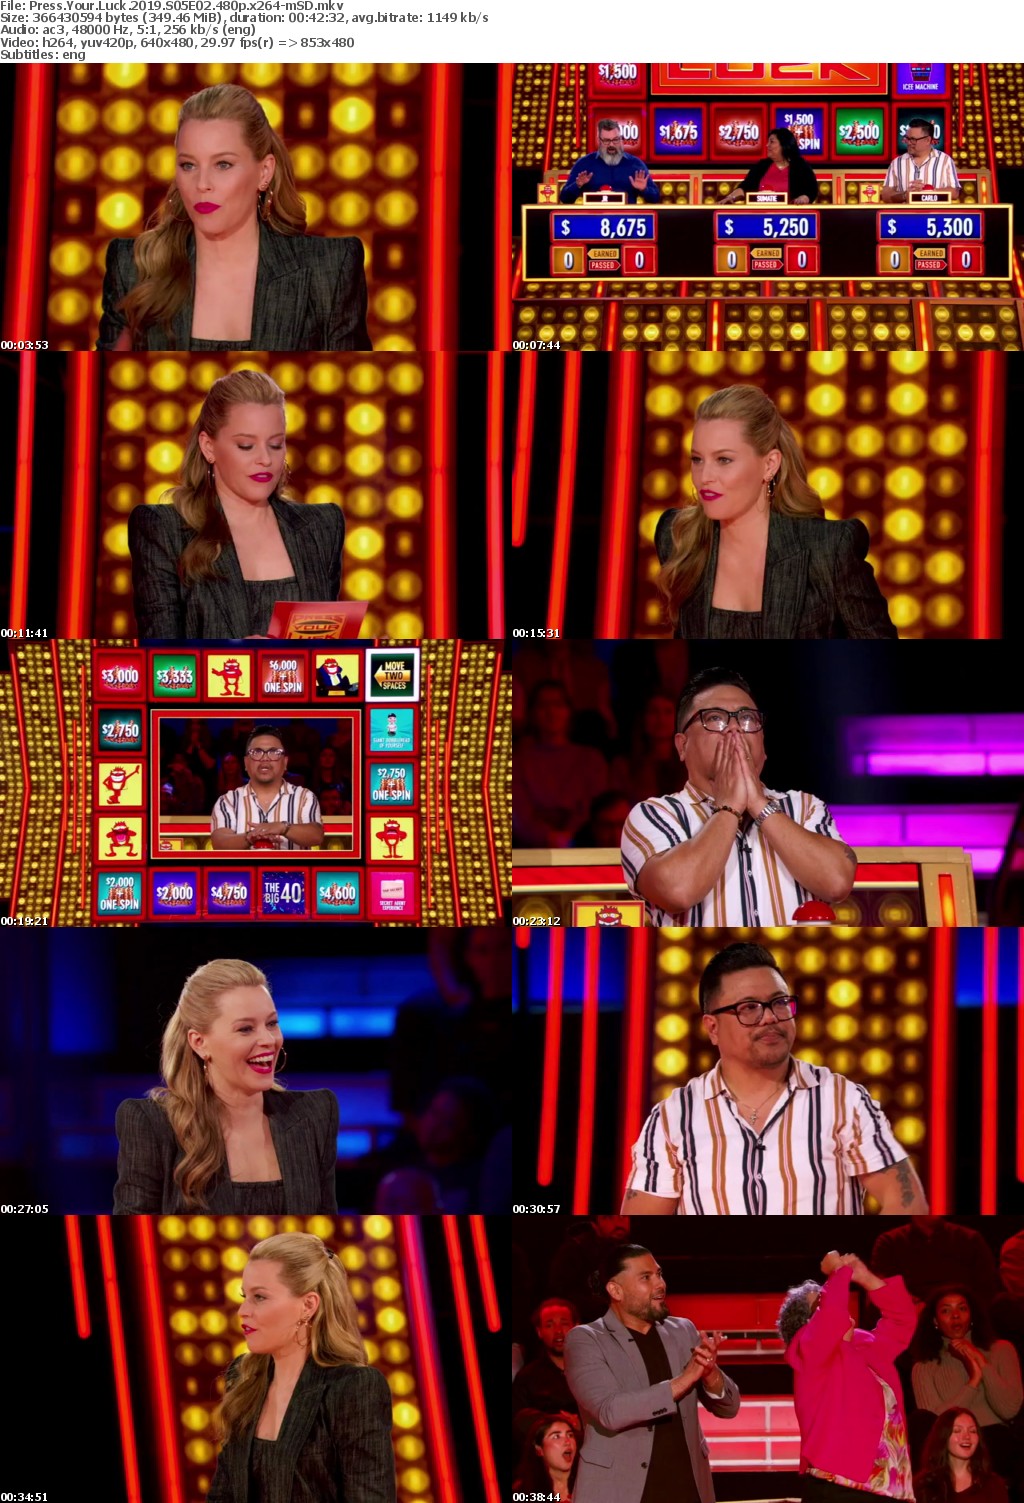 Press Your Luck 2019 S05E02 480p x264-mSD